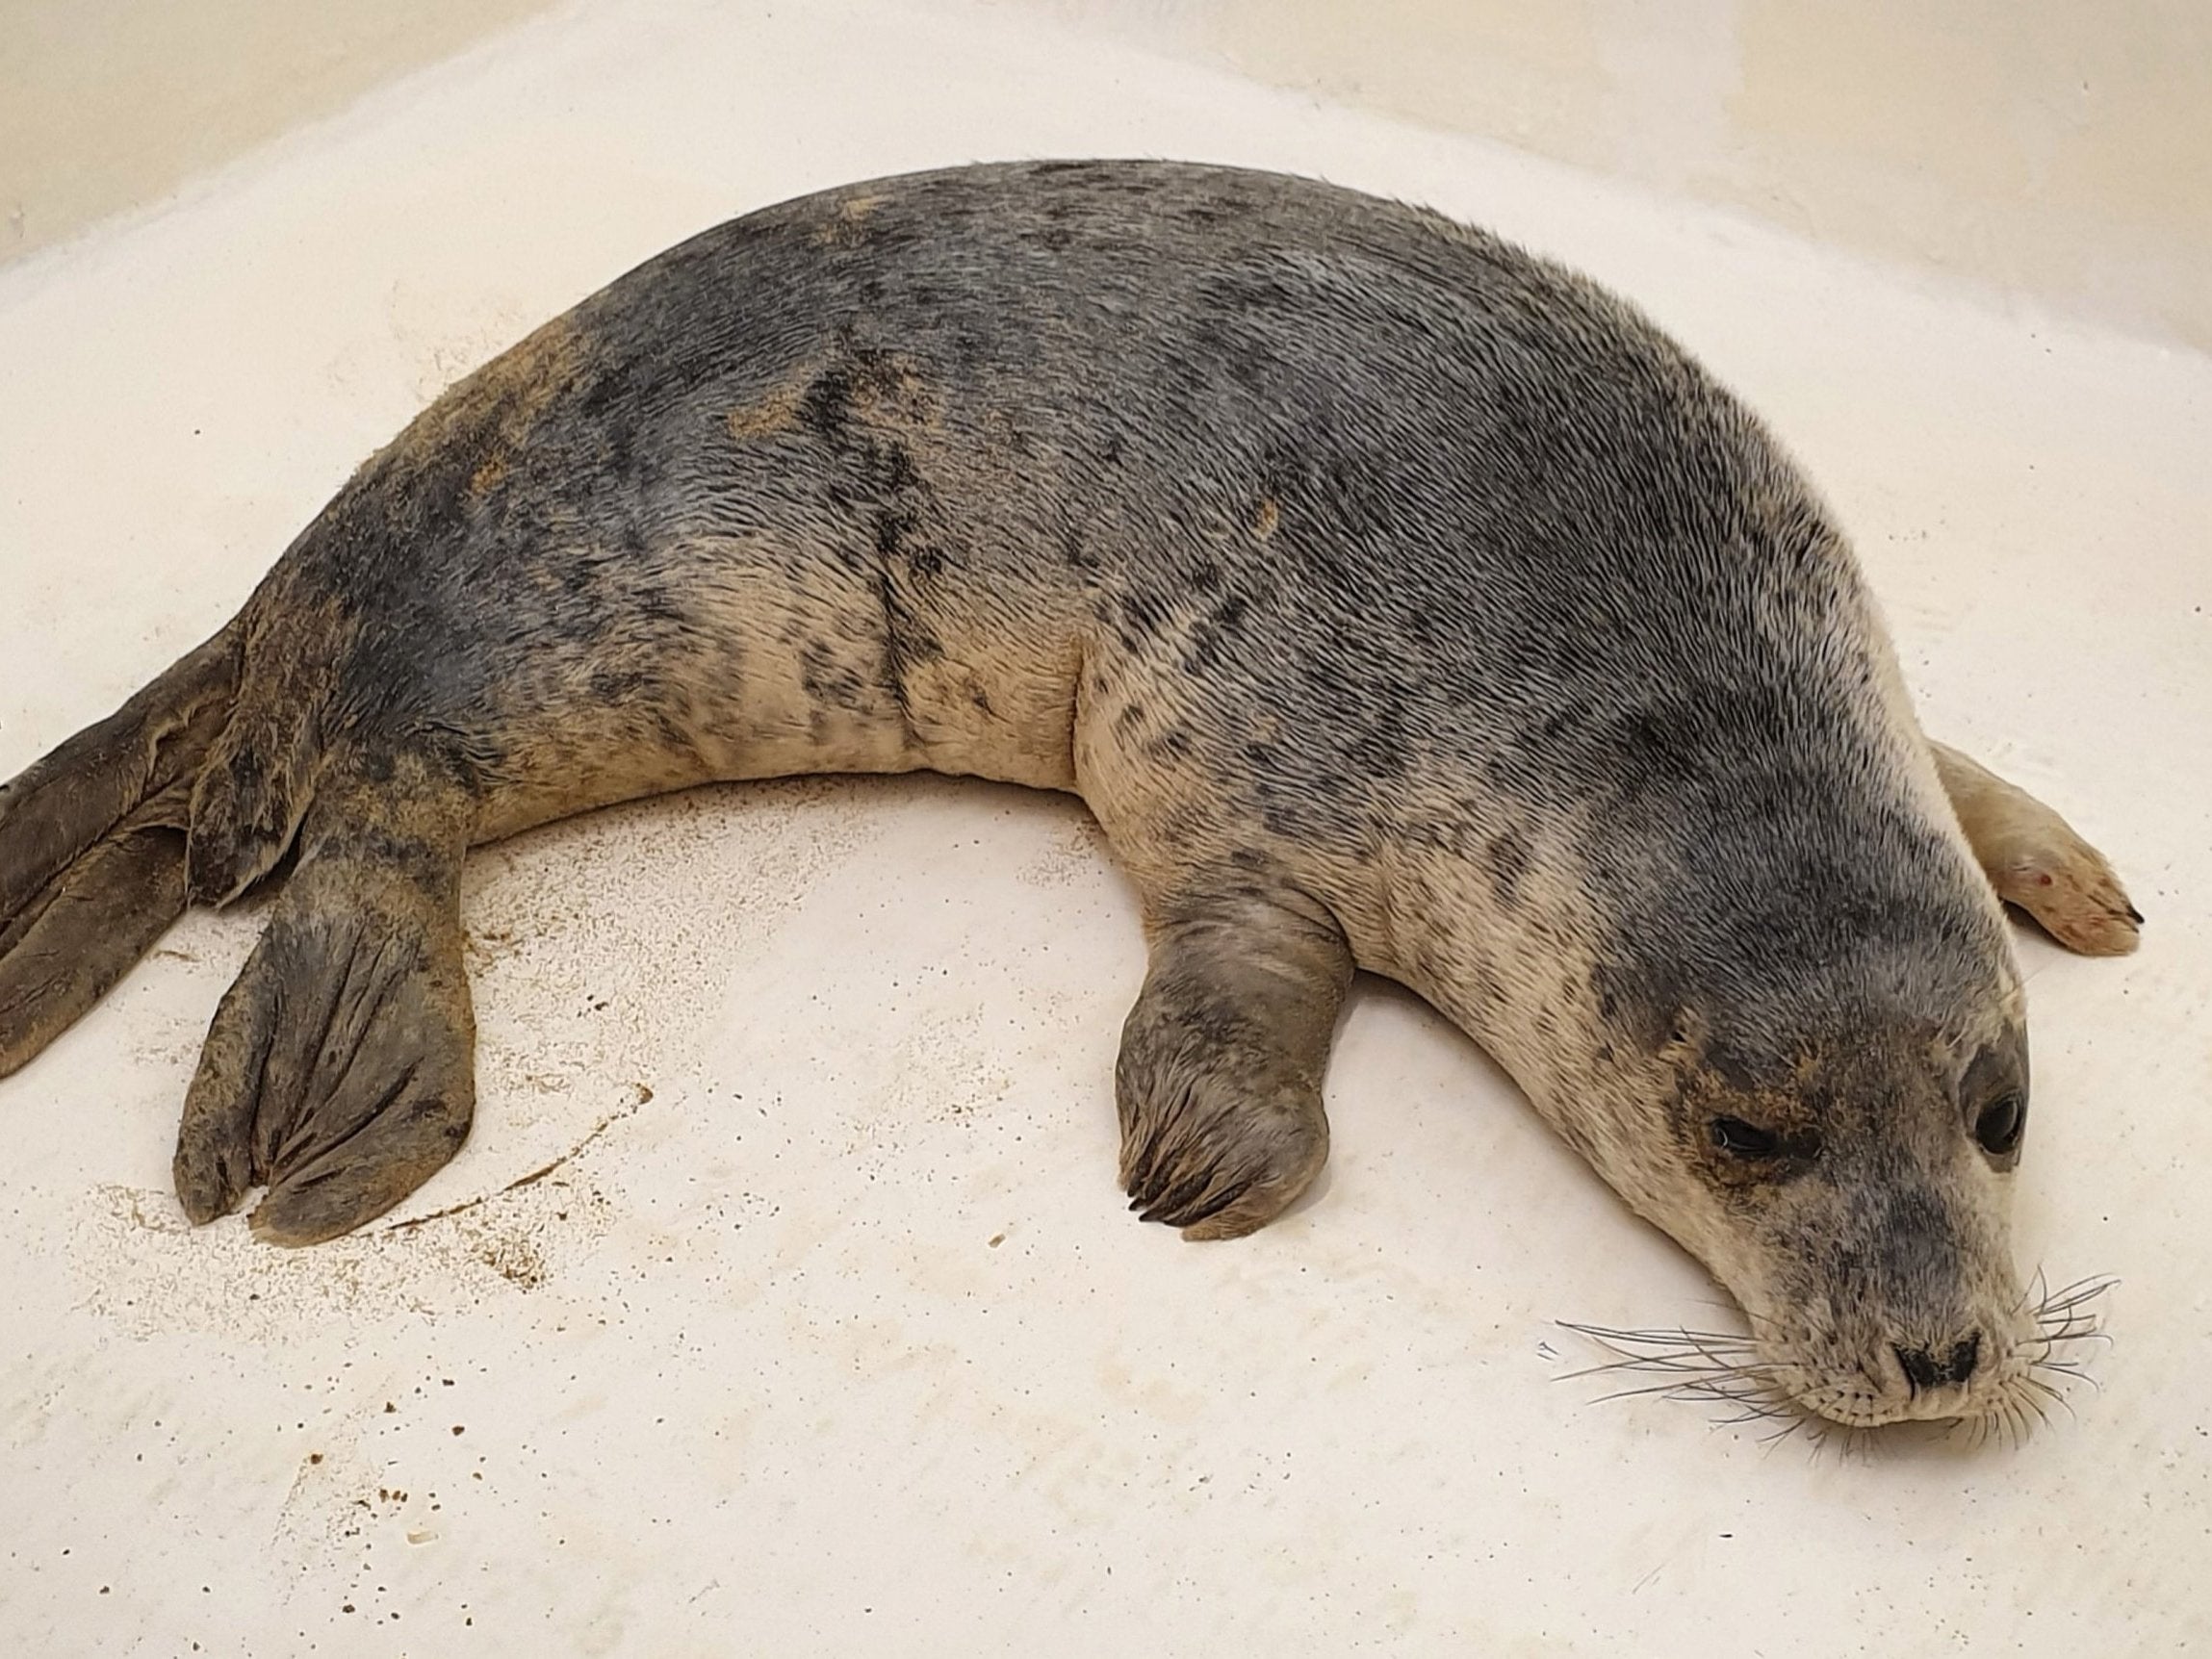 The grey seal was treated for a slight eye infection before being released